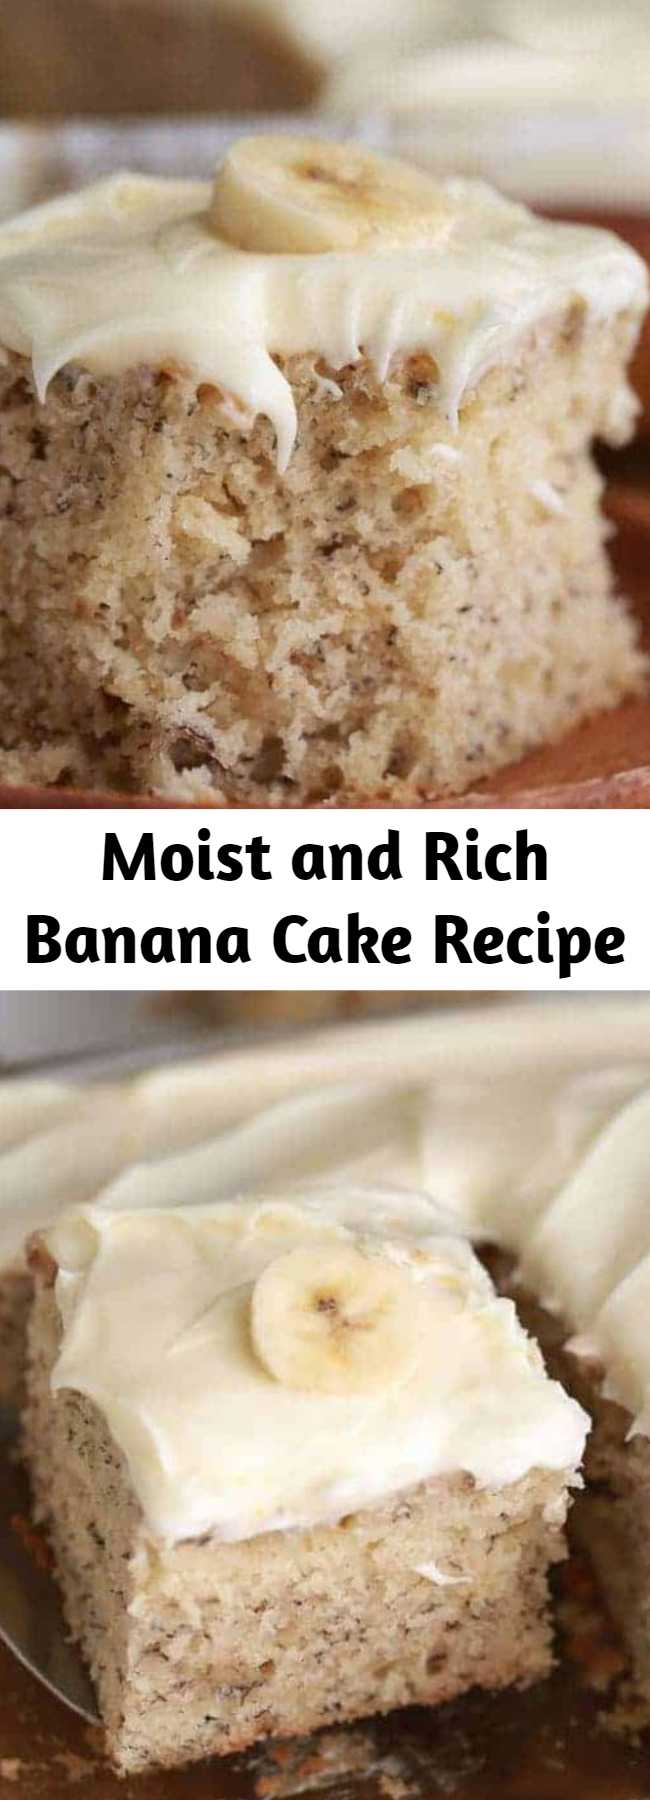 Moist and Rich Banana Cake Recipe - This Banana Cake is soft, moist and rich all at the same time! Once cooled this cake is topped with a totally irresistible lemon cream cheese frosting for a perfect dessert your family will love.